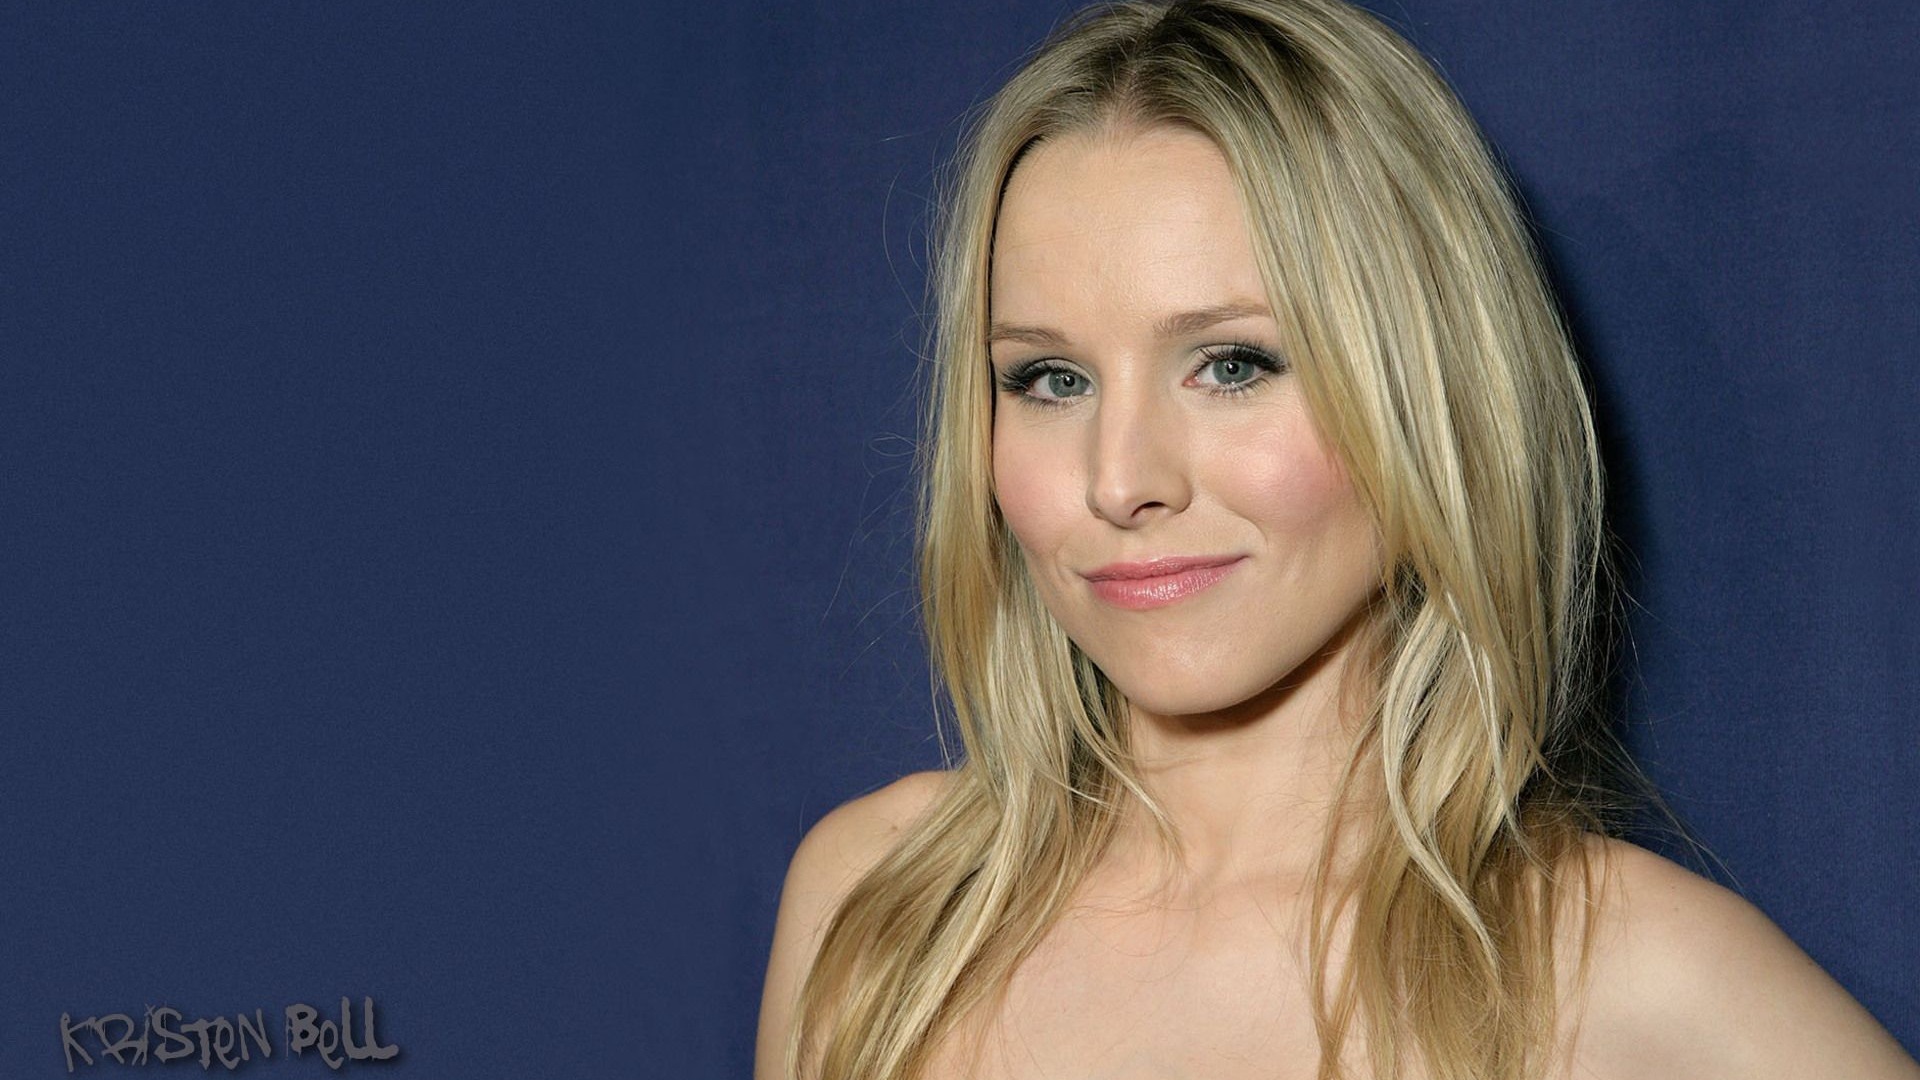 Kristen Bell #074 - 1920x1080 Wallpapers Pictures Photos Images